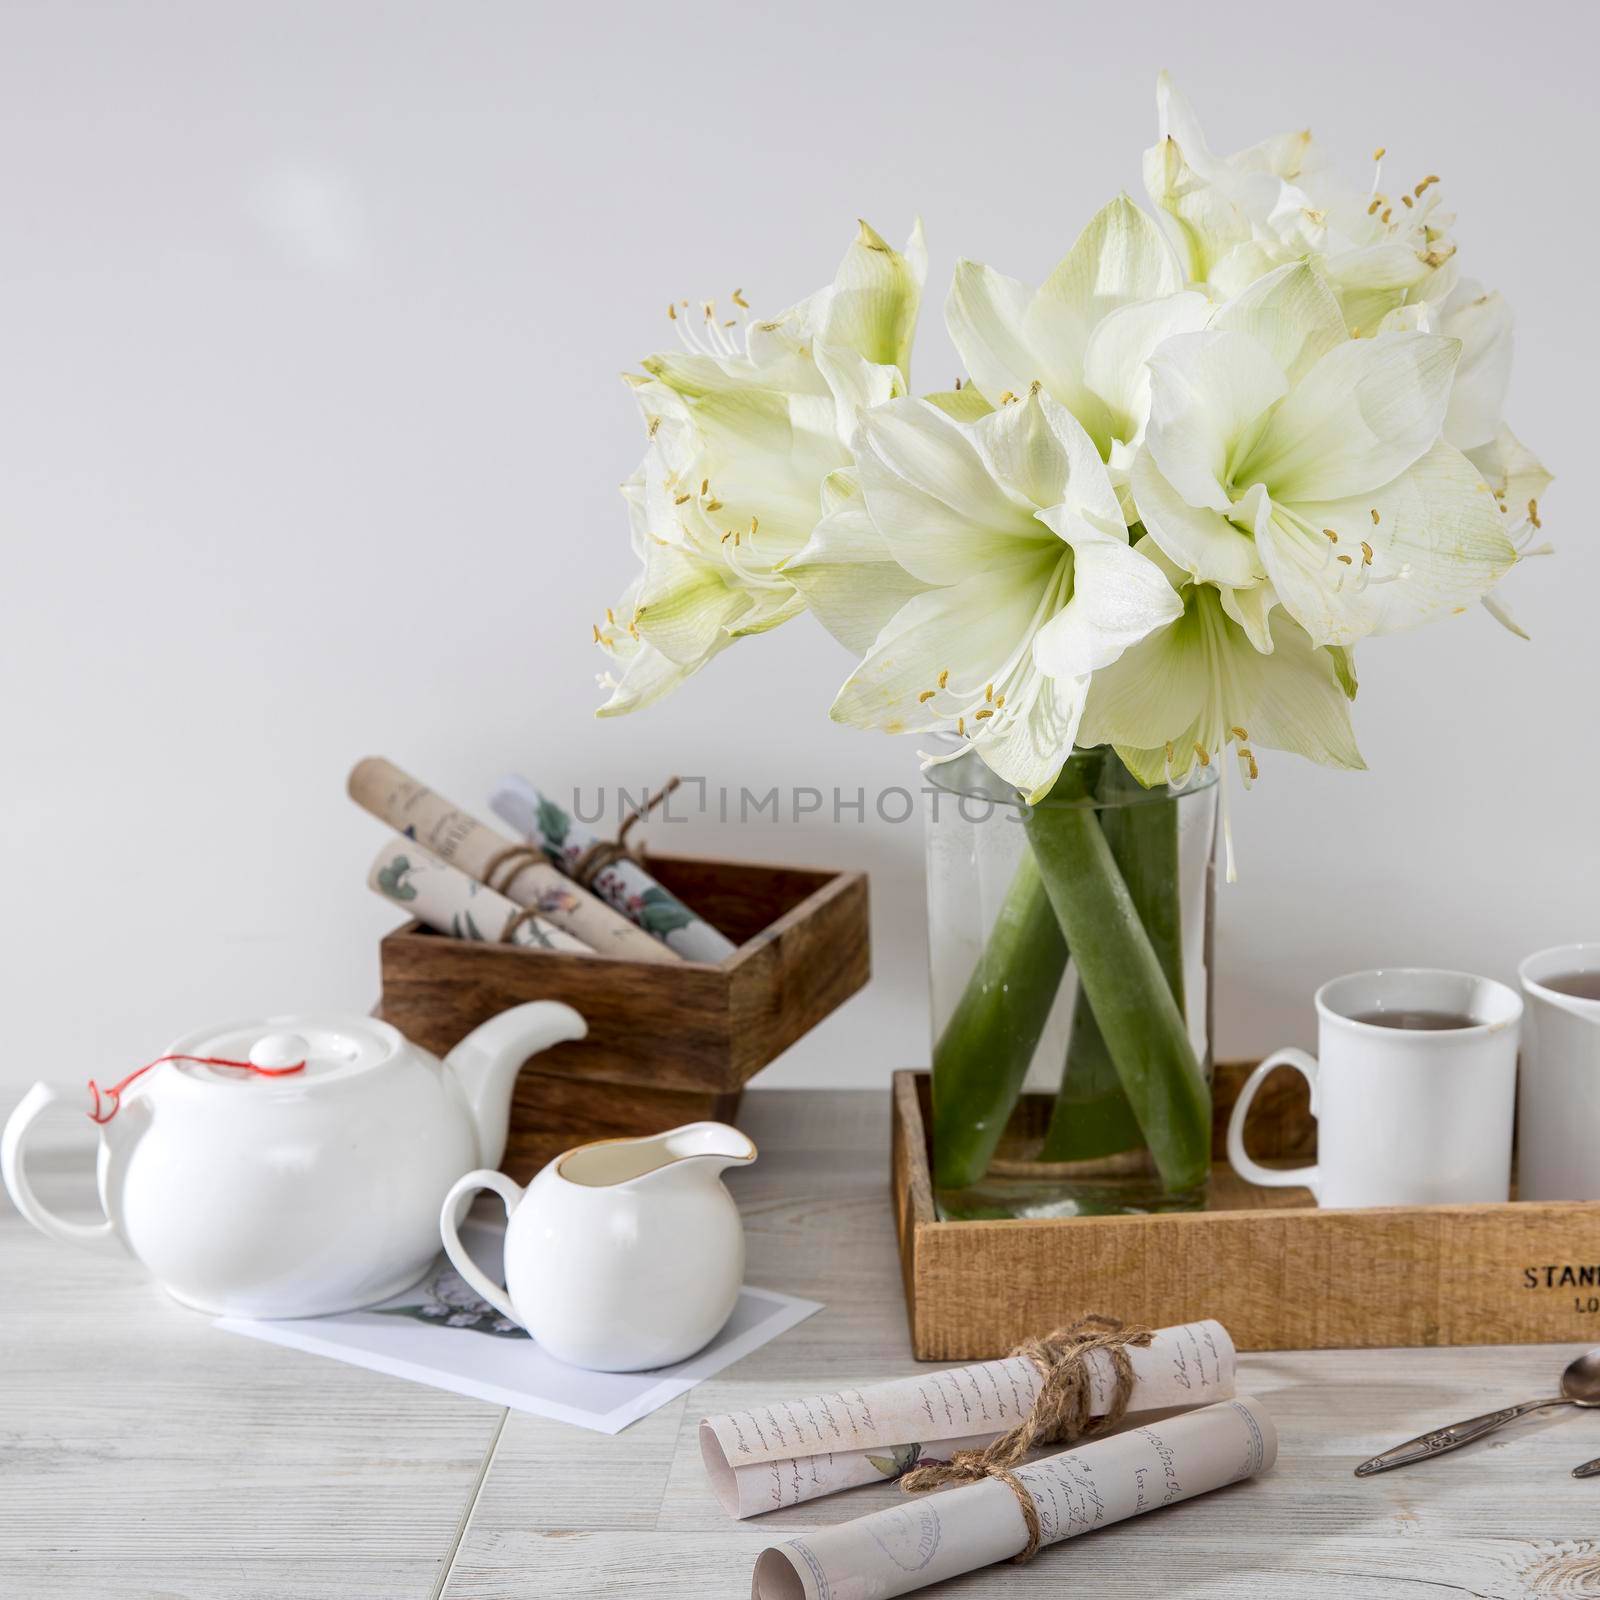 A bouquet of white lily in a glass vase on a table with two tall cups of coffee, a teapot, spoons. Copy space. Sqaure frame